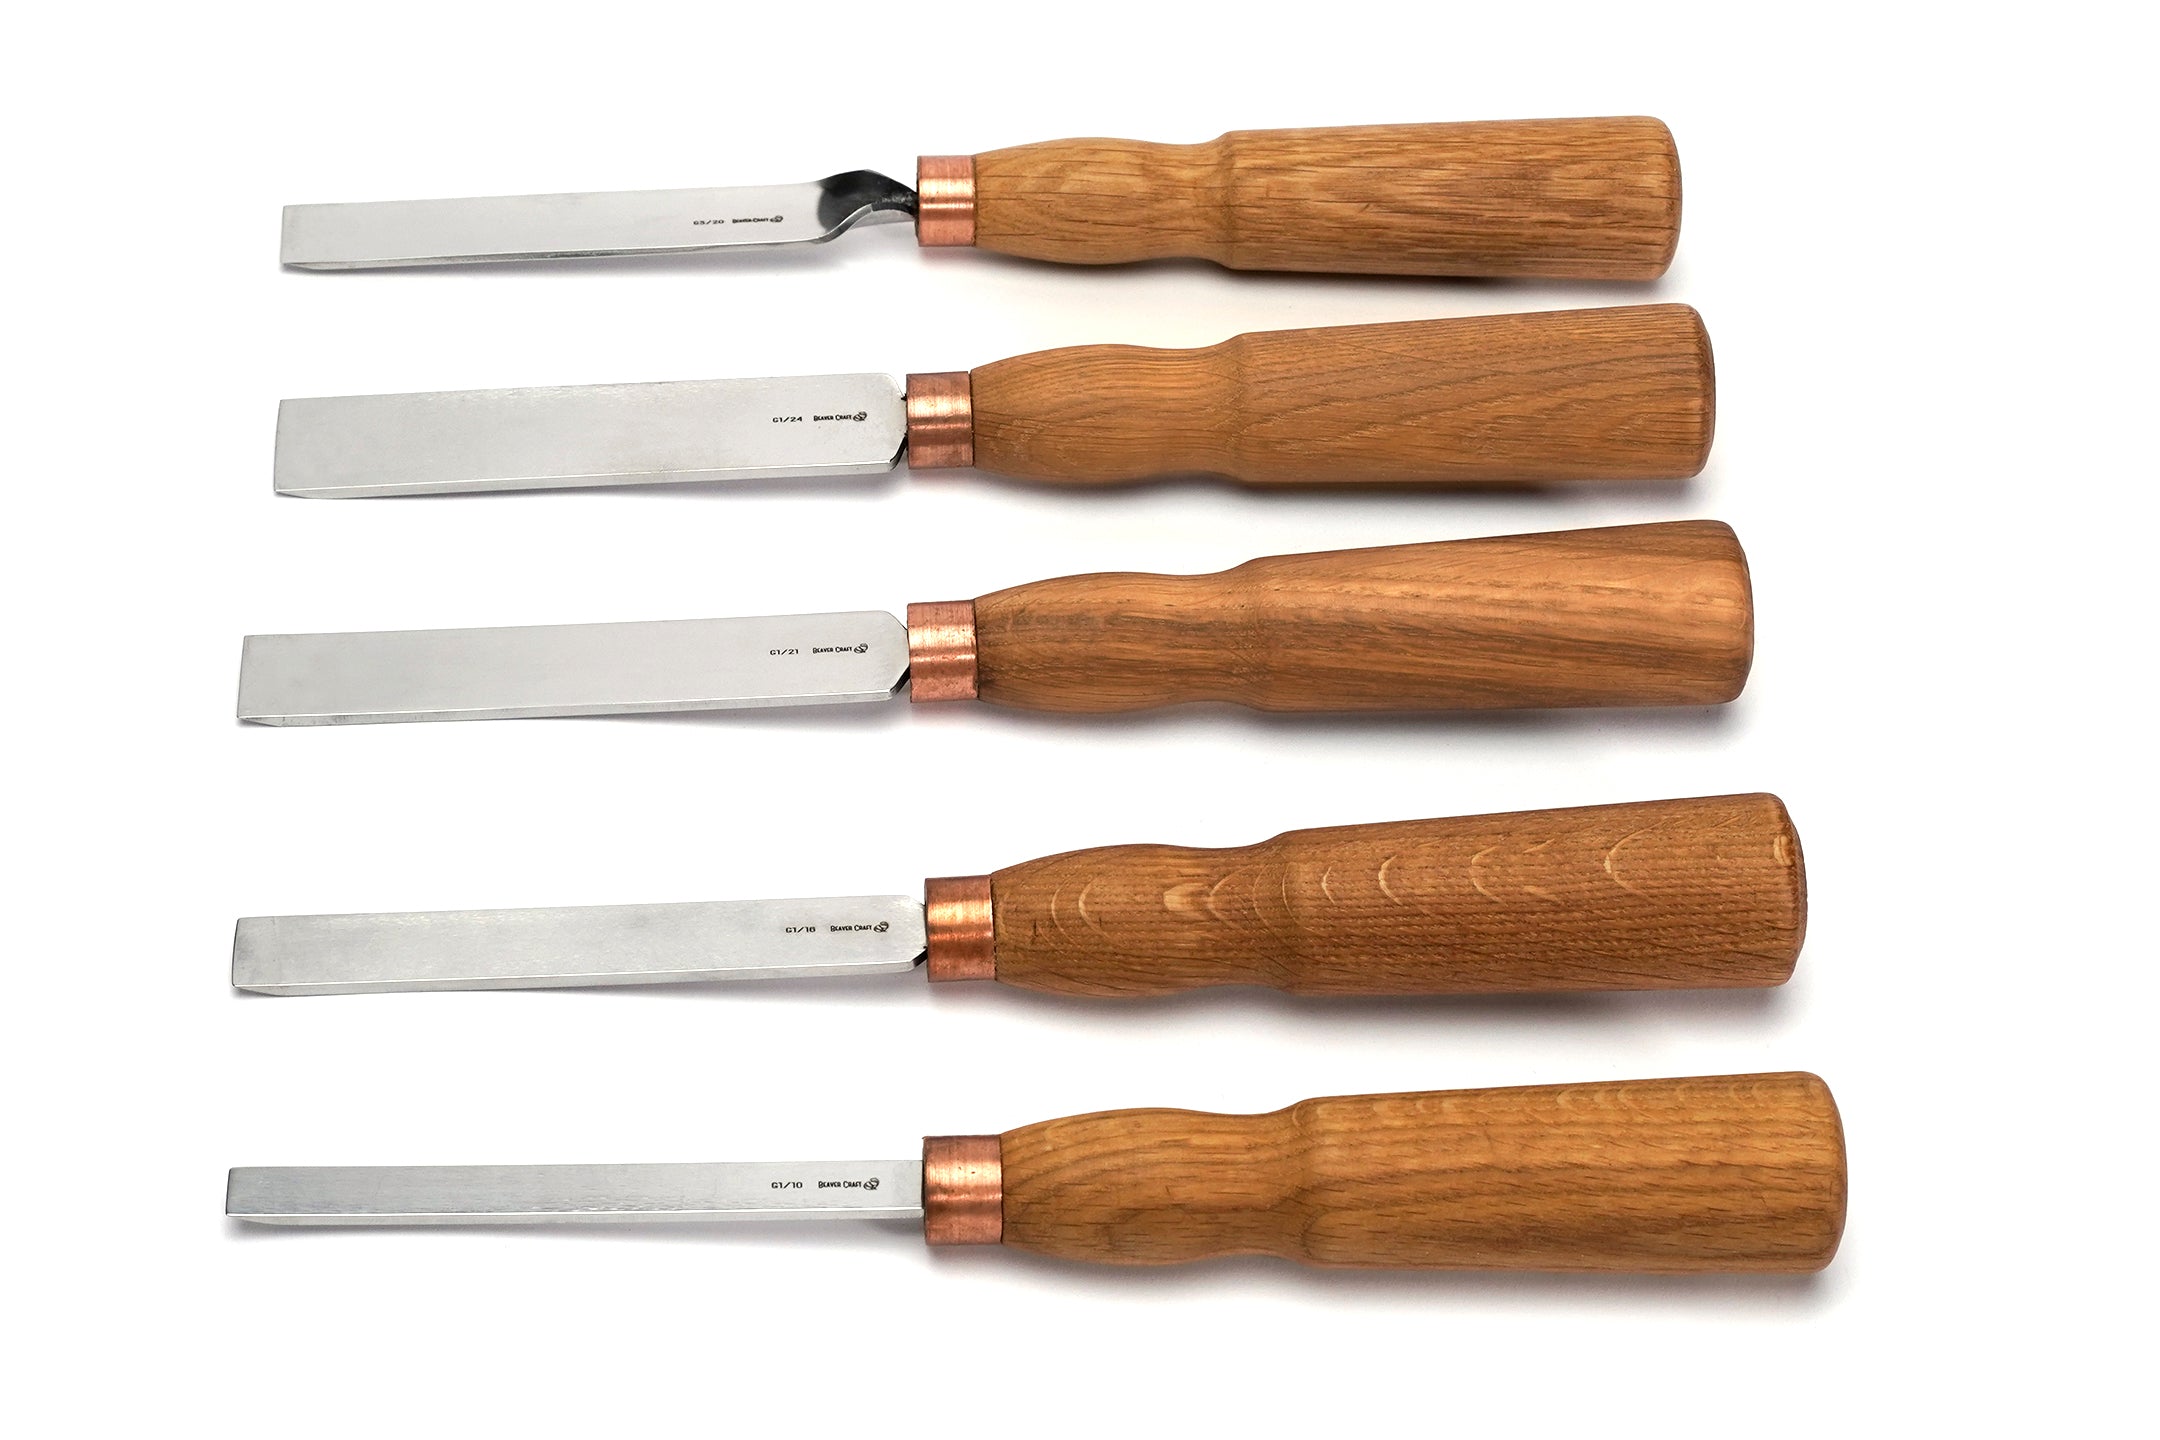 S70L – Extended Wood Carving Set of Knives, Chisels, Gouges, and Sharpening Accessories in a Tool Holder (left-handed)